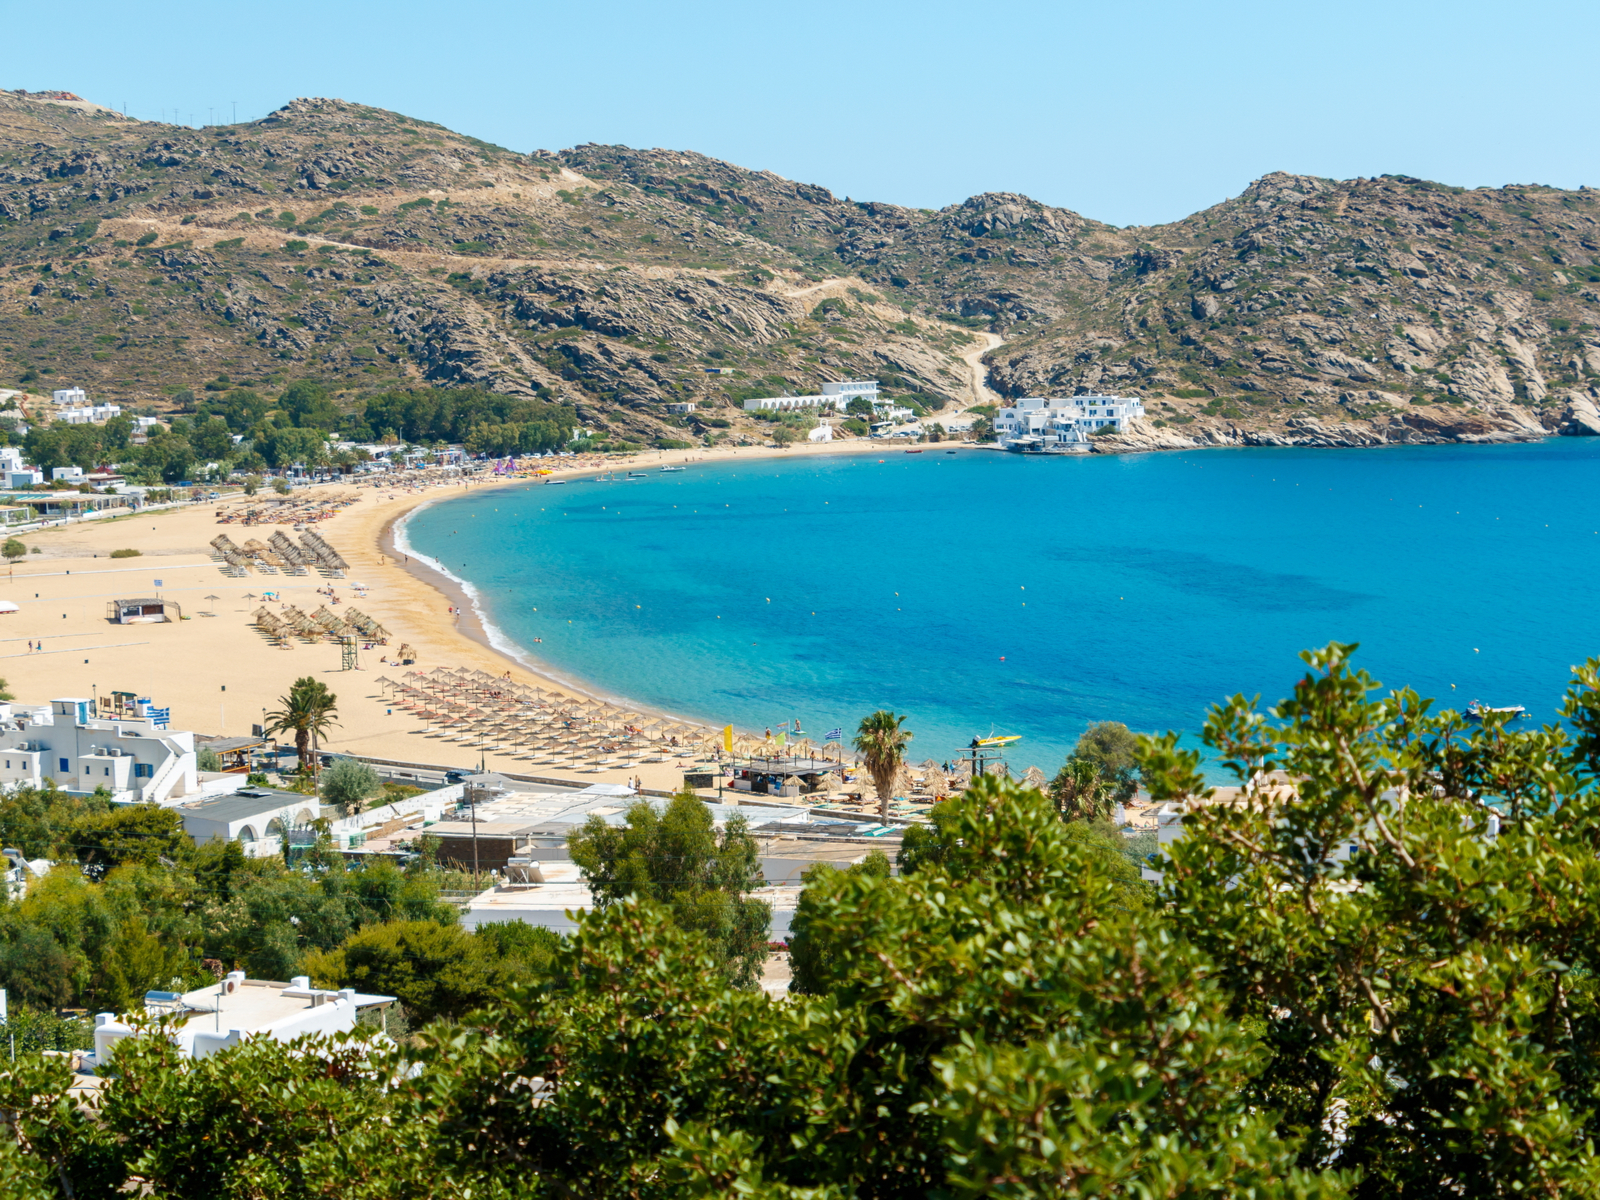 Picture of one of the best beaches in Greece, Mylopotas, Ios, pictured from the hilltop